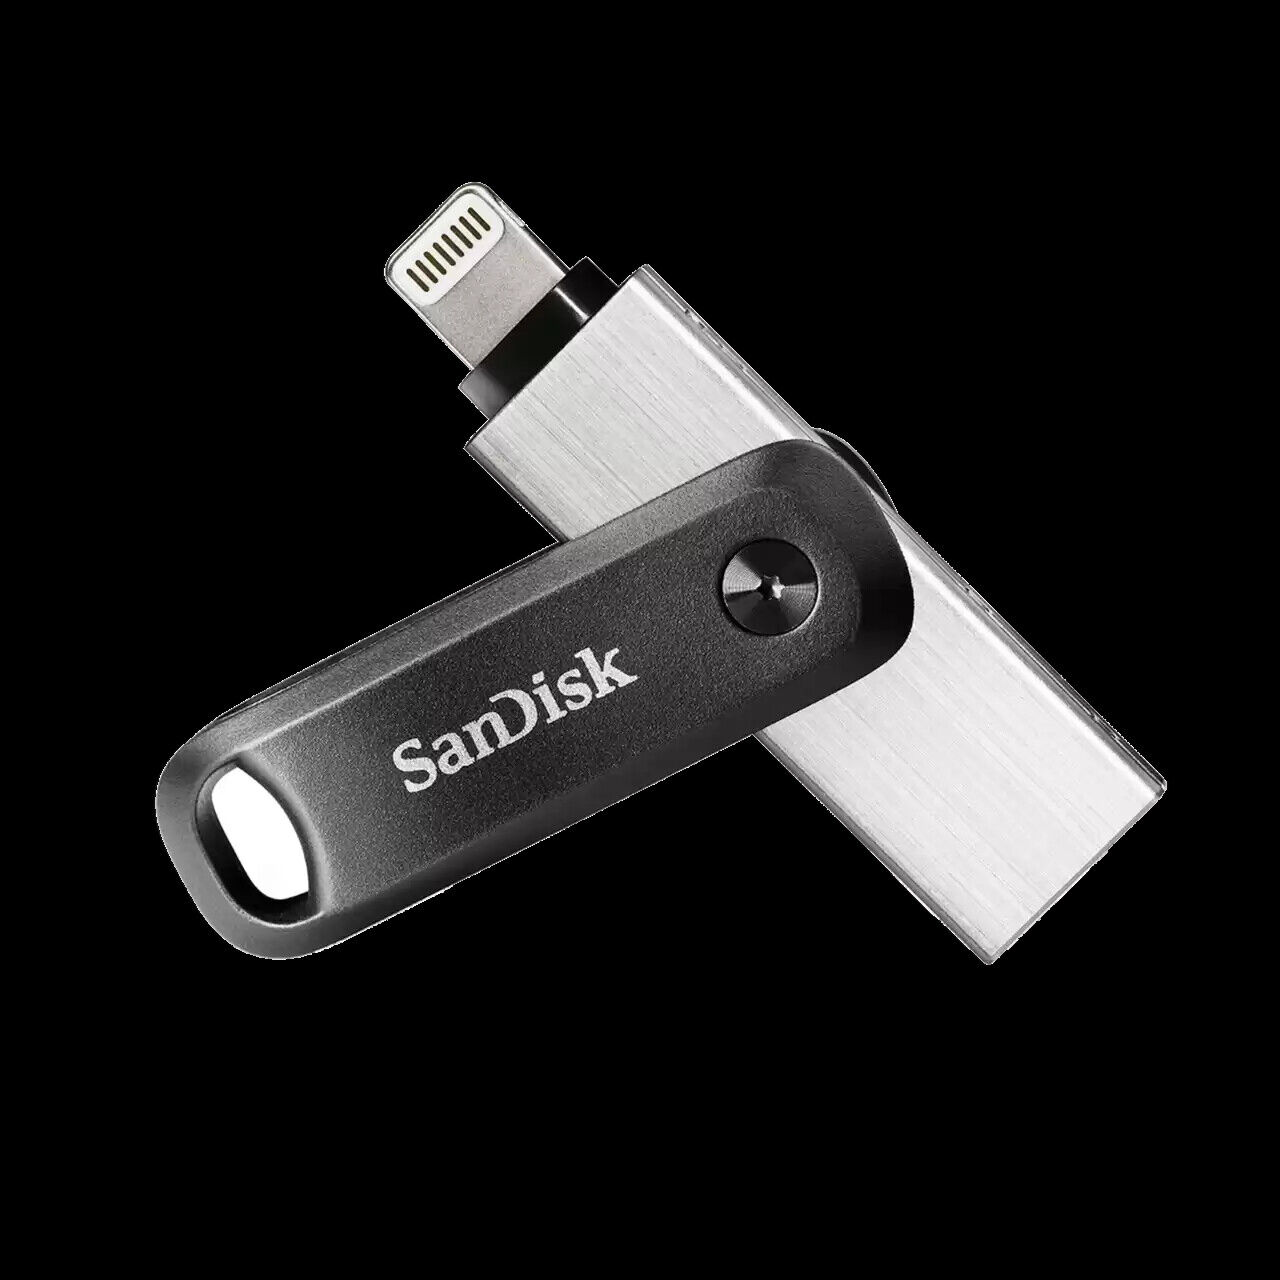 SanDisk 64GB iXpand Flash Drive Go, for iPhone and iPad - SDIX60N-064G-GN6NN